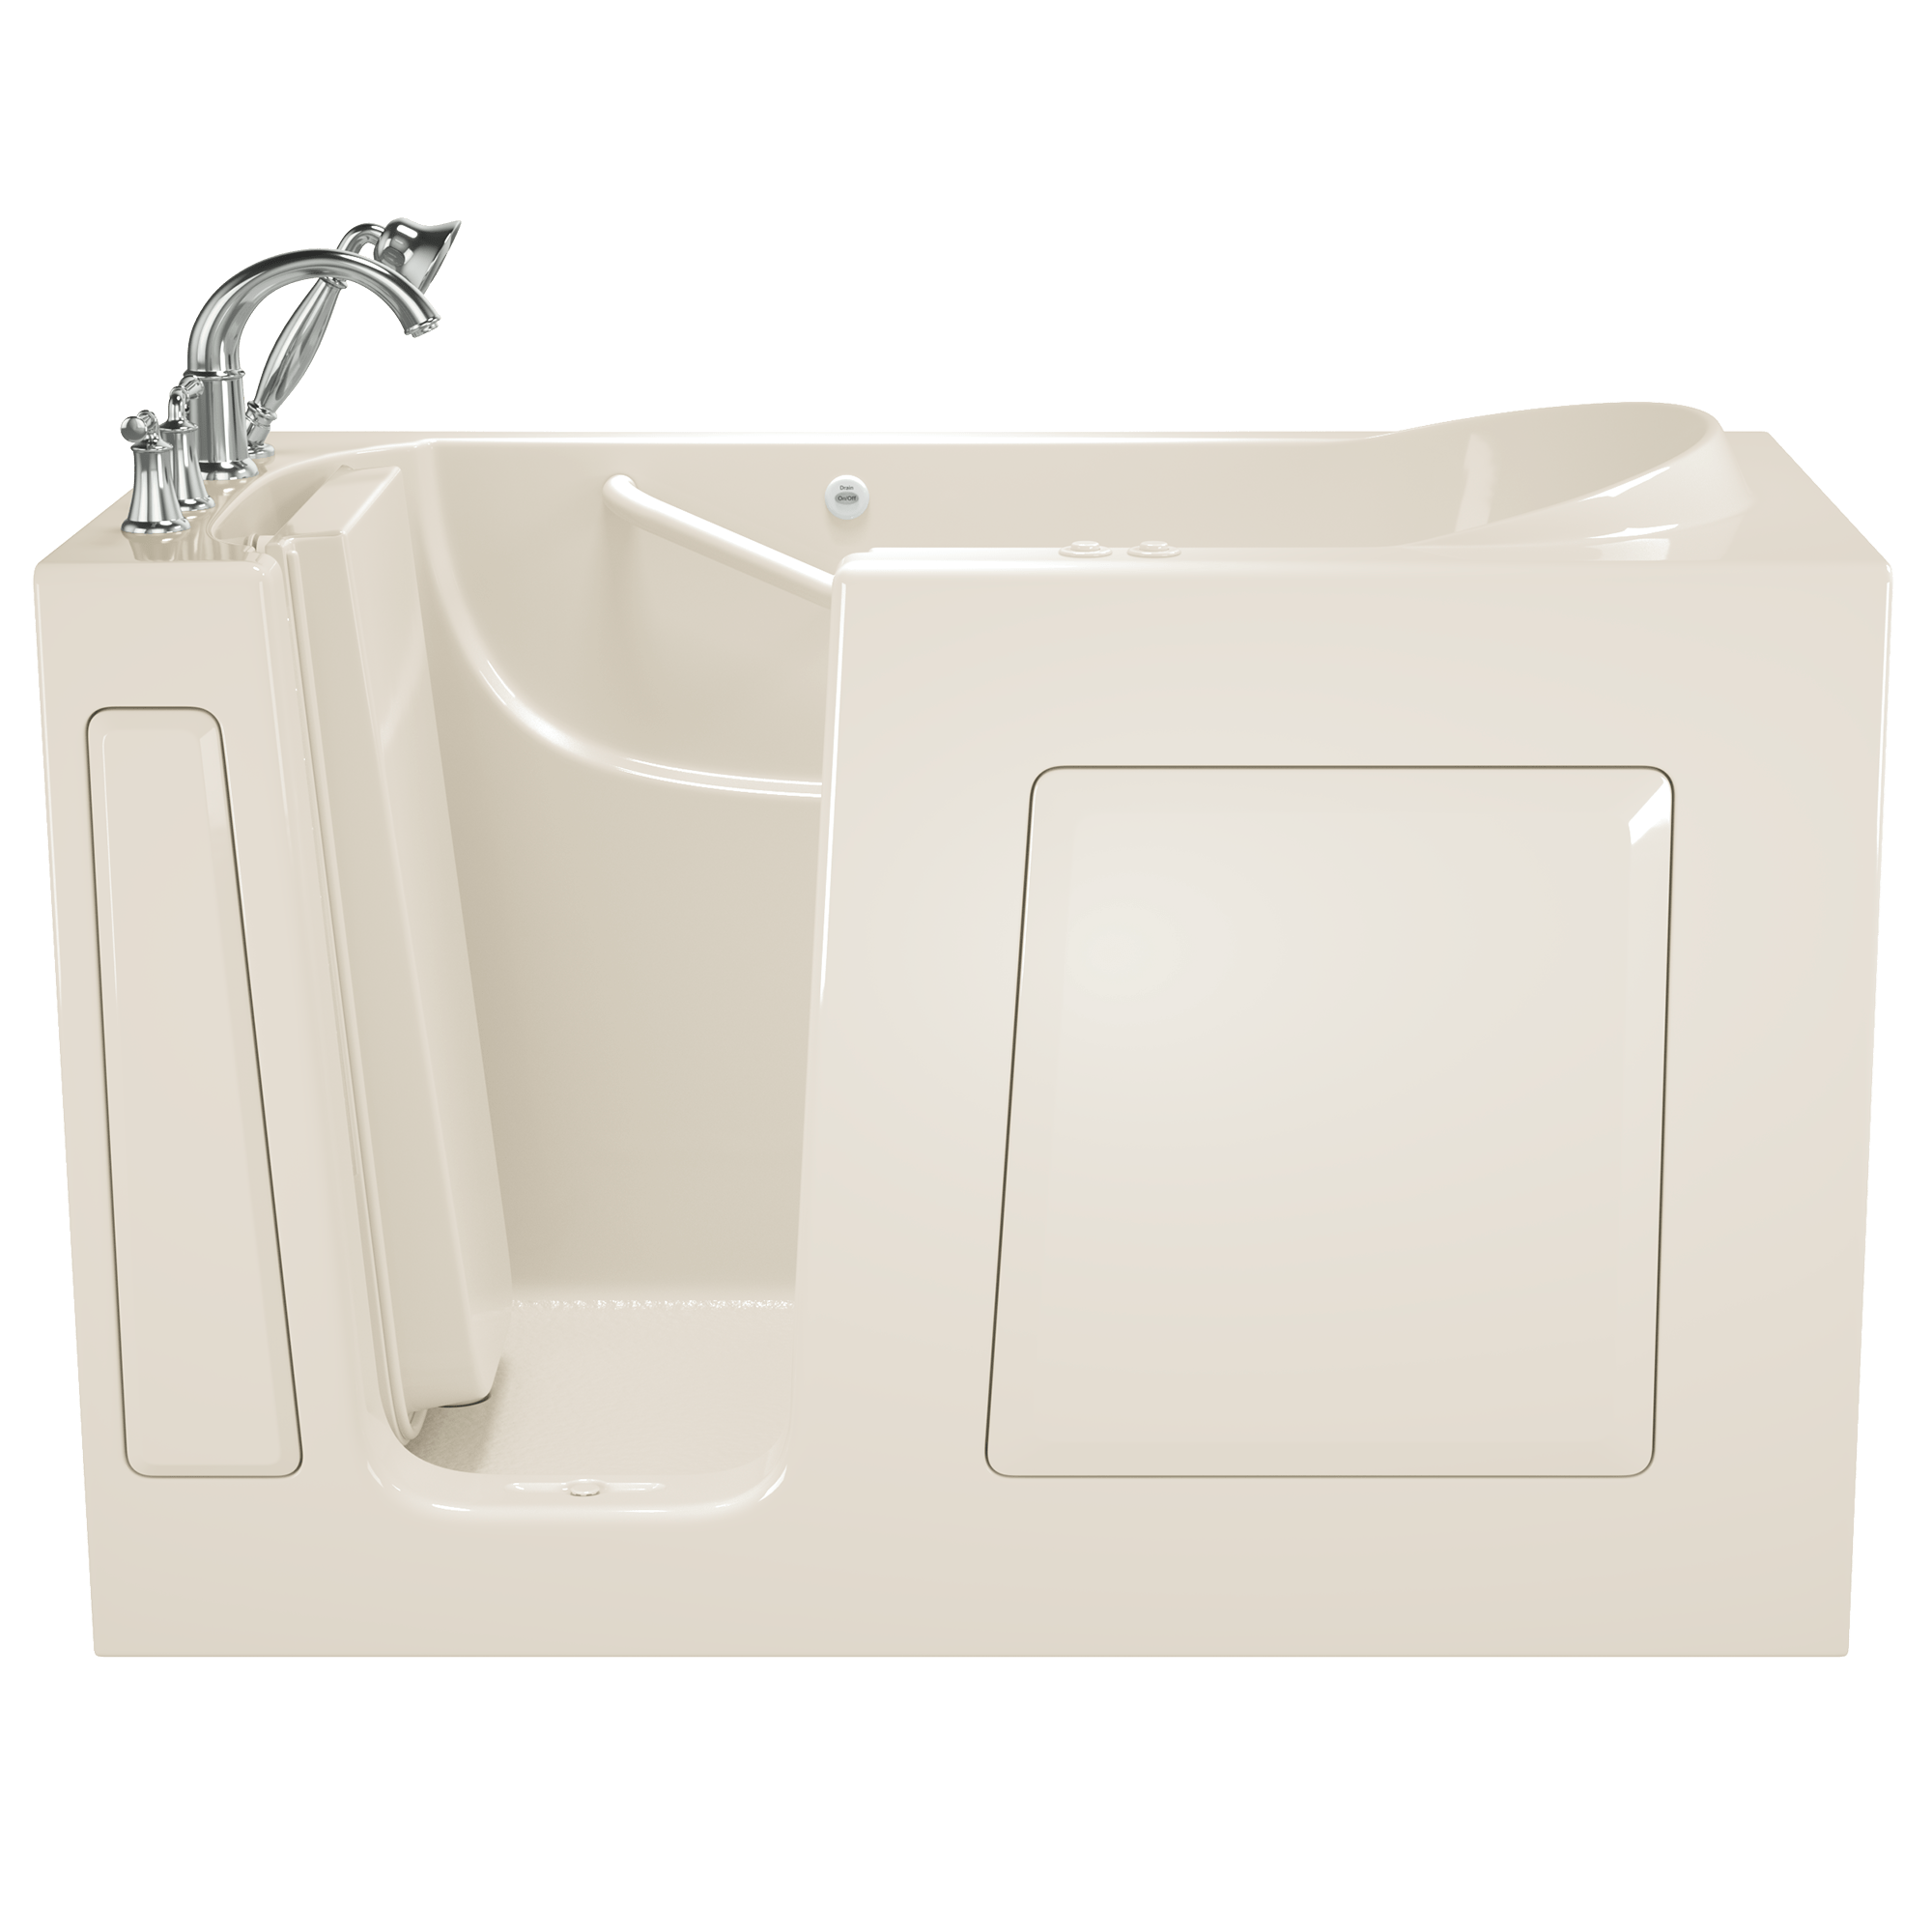 Gelcoat Value Series 30x60 Inch Walk In Bathtub with Combination Air Spa and Whirlpool Massage System   Left Hand Door and Drain WIB LINEN